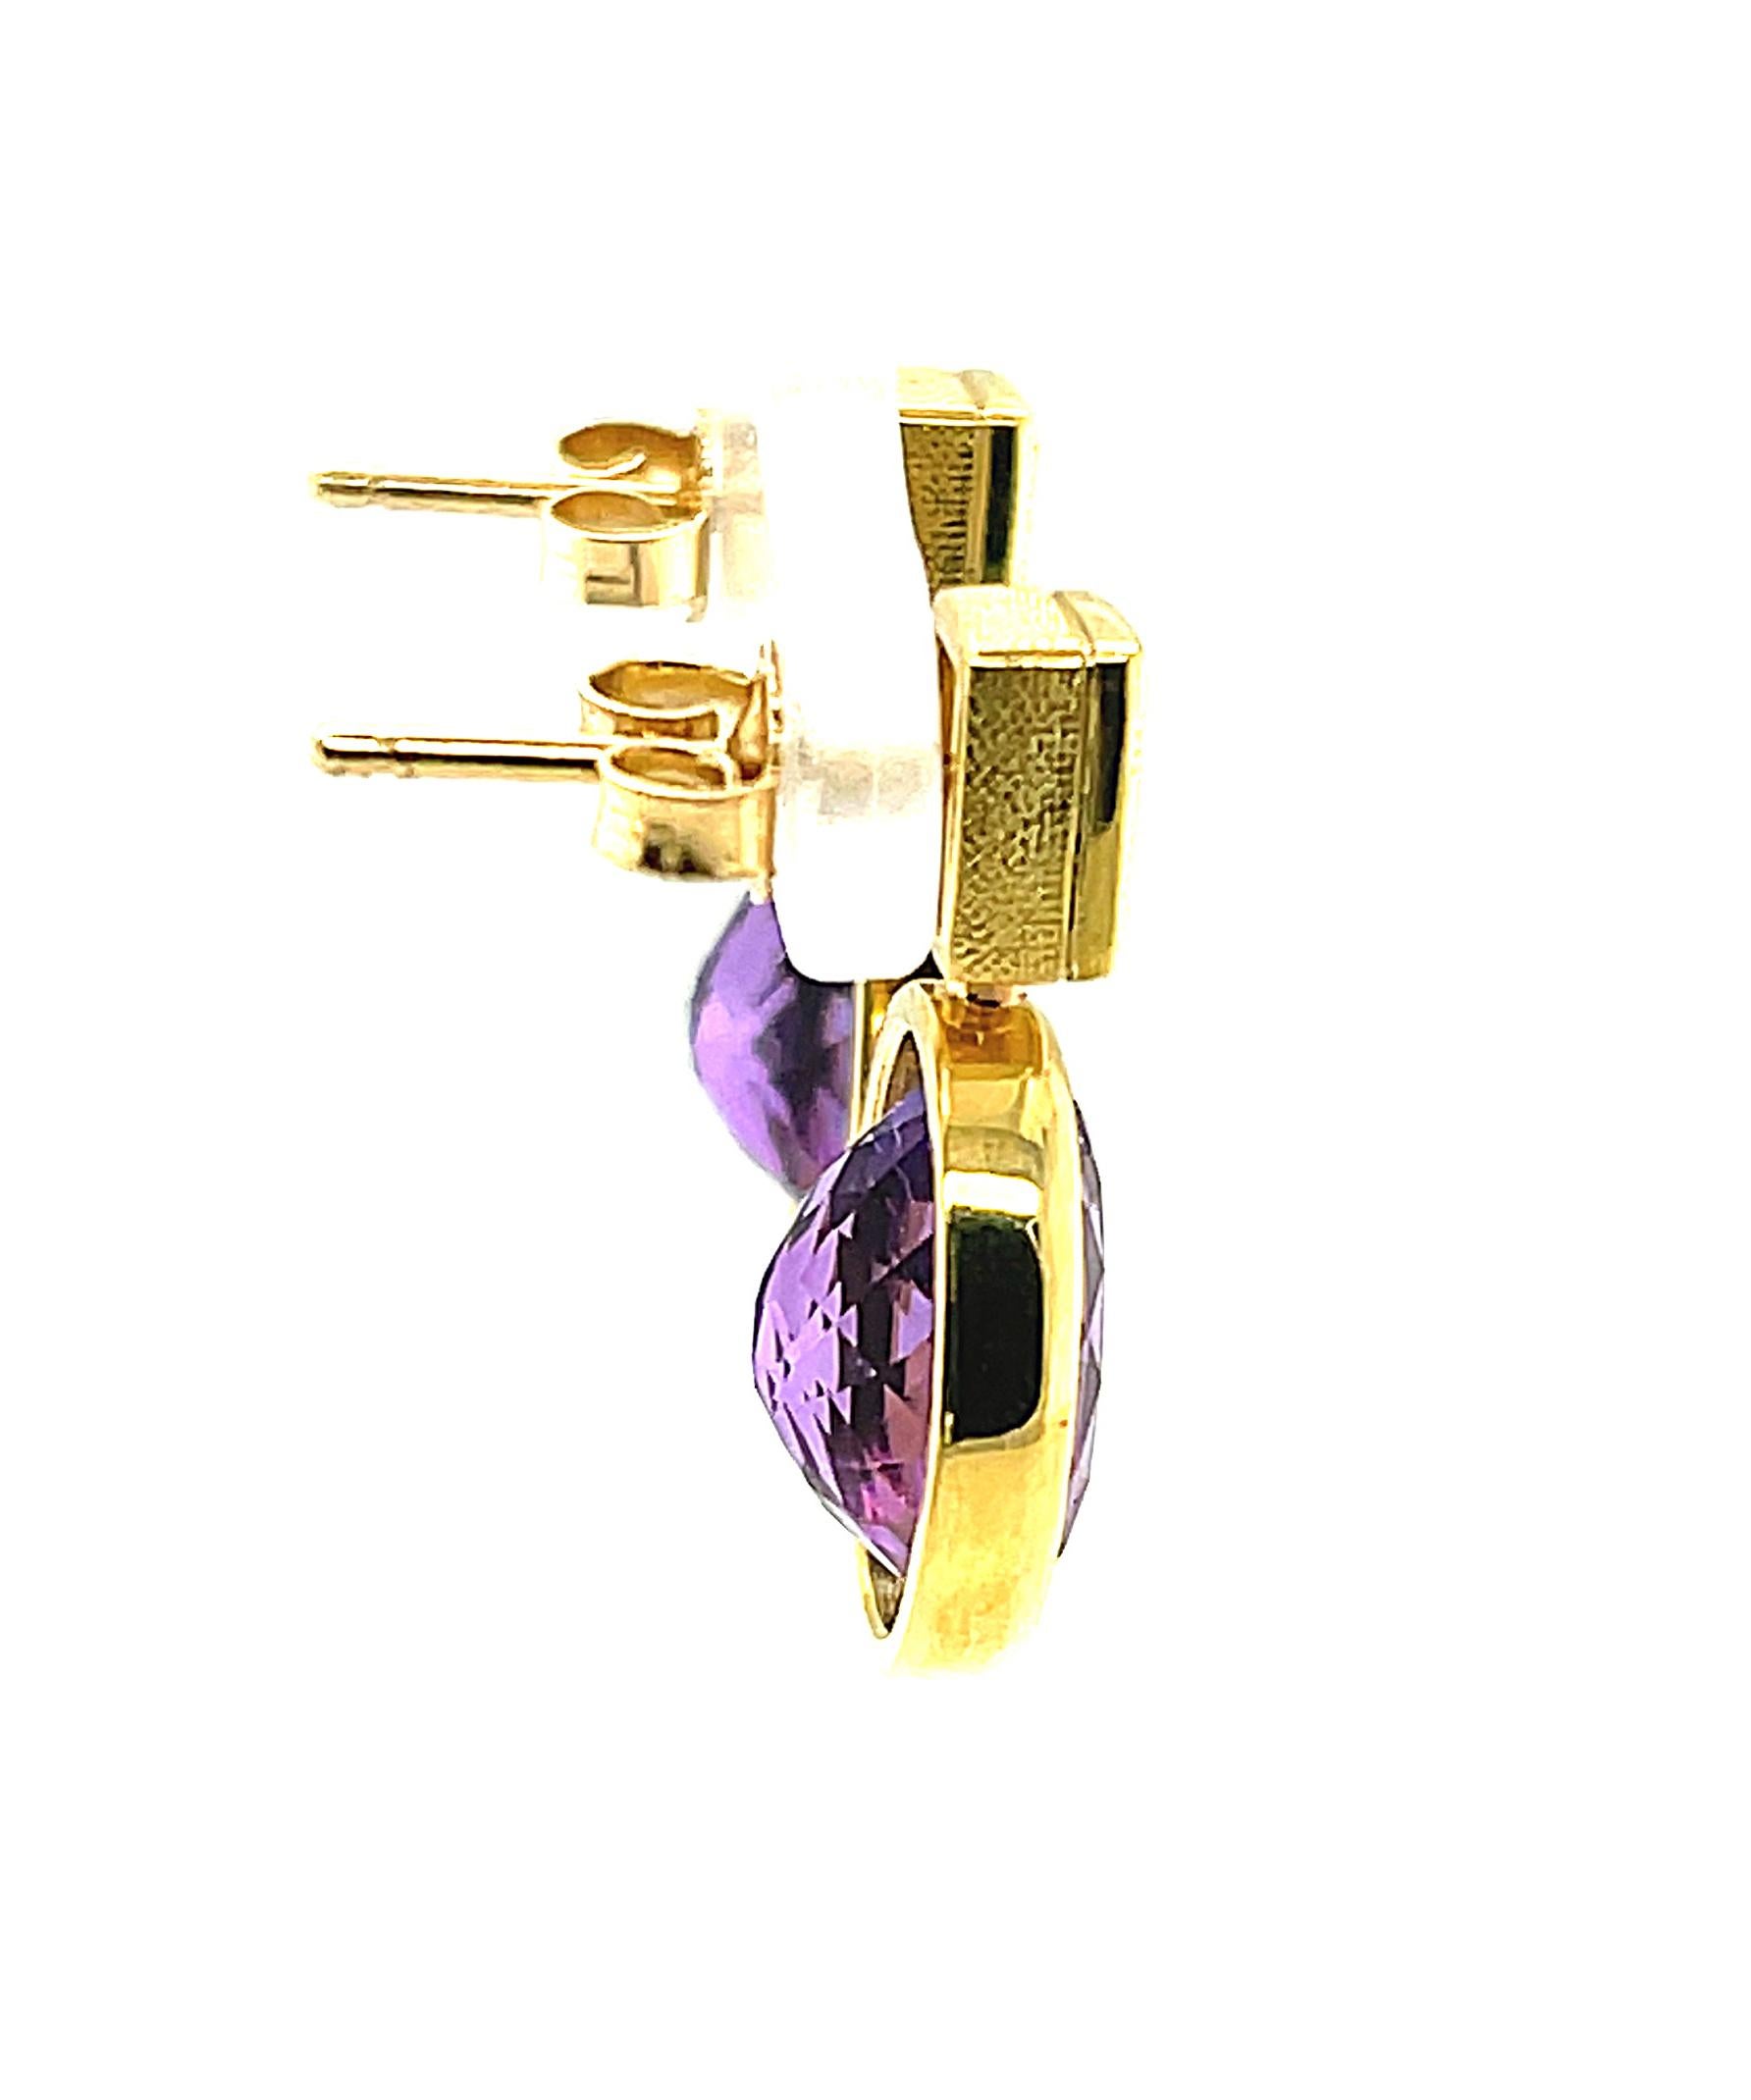 Oval Cut Amethyst and Diamond Drop Earrings in 18k Yellow Gold, 6.72 Carats Total For Sale